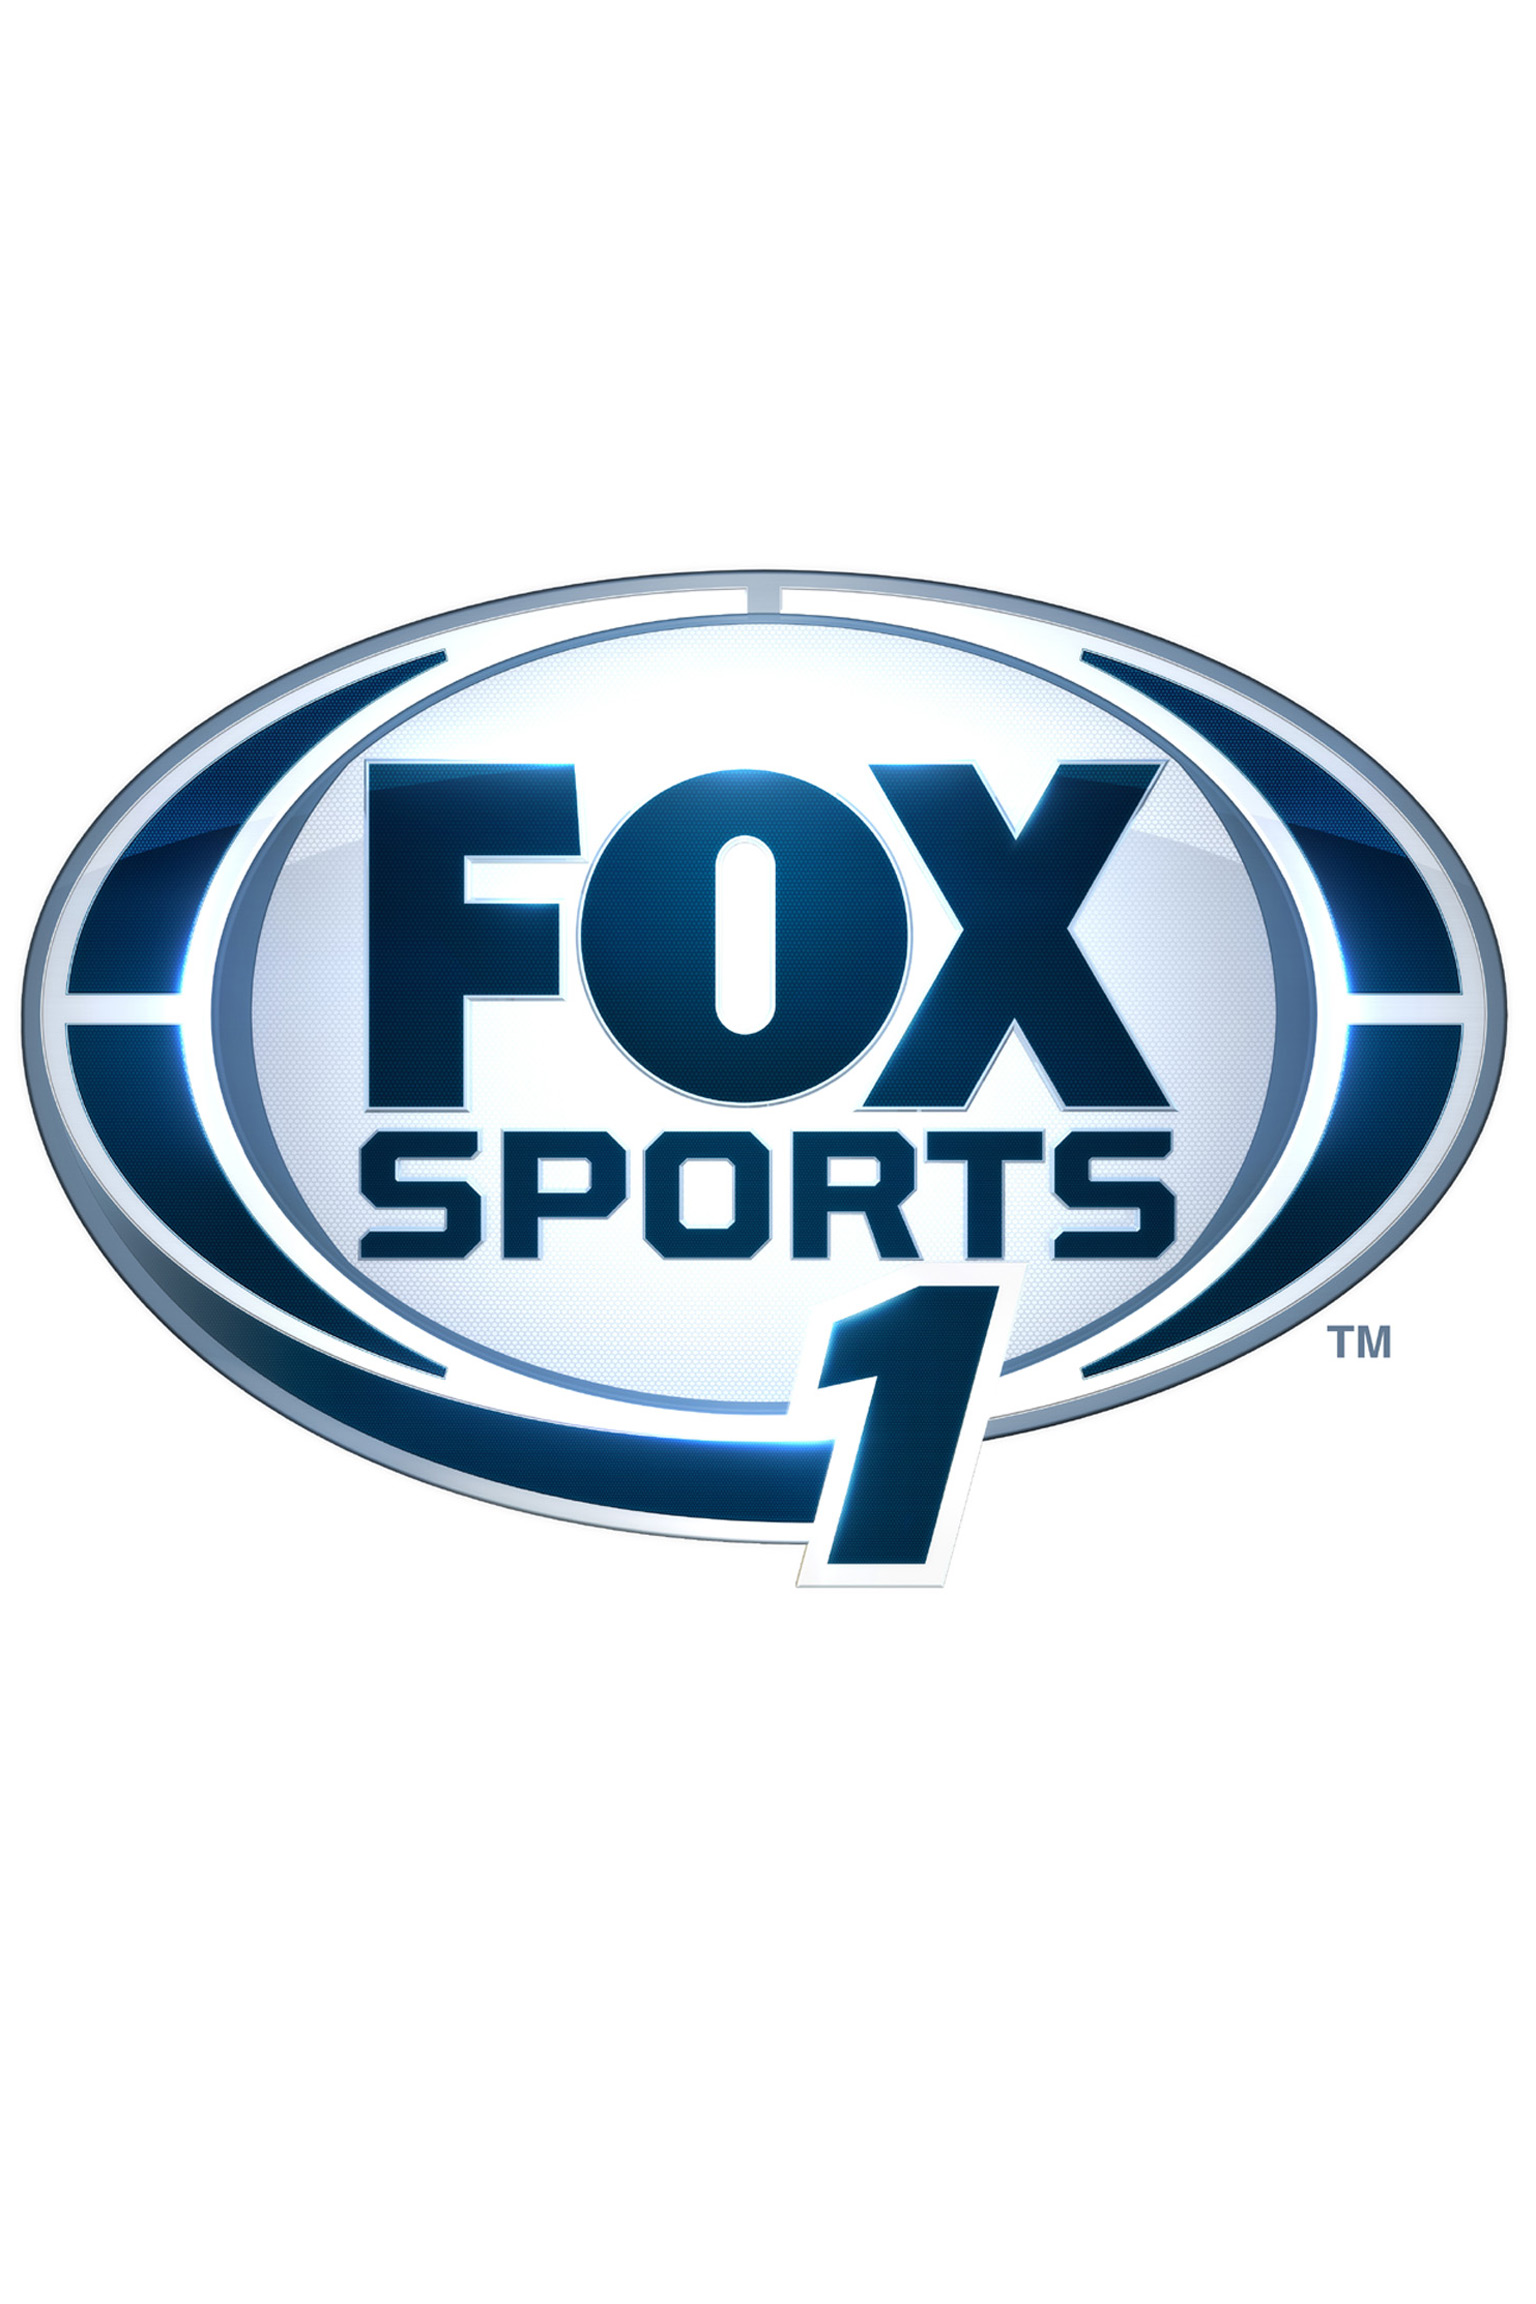 Fox Sports 1 on 1 - Where to Watch and Stream